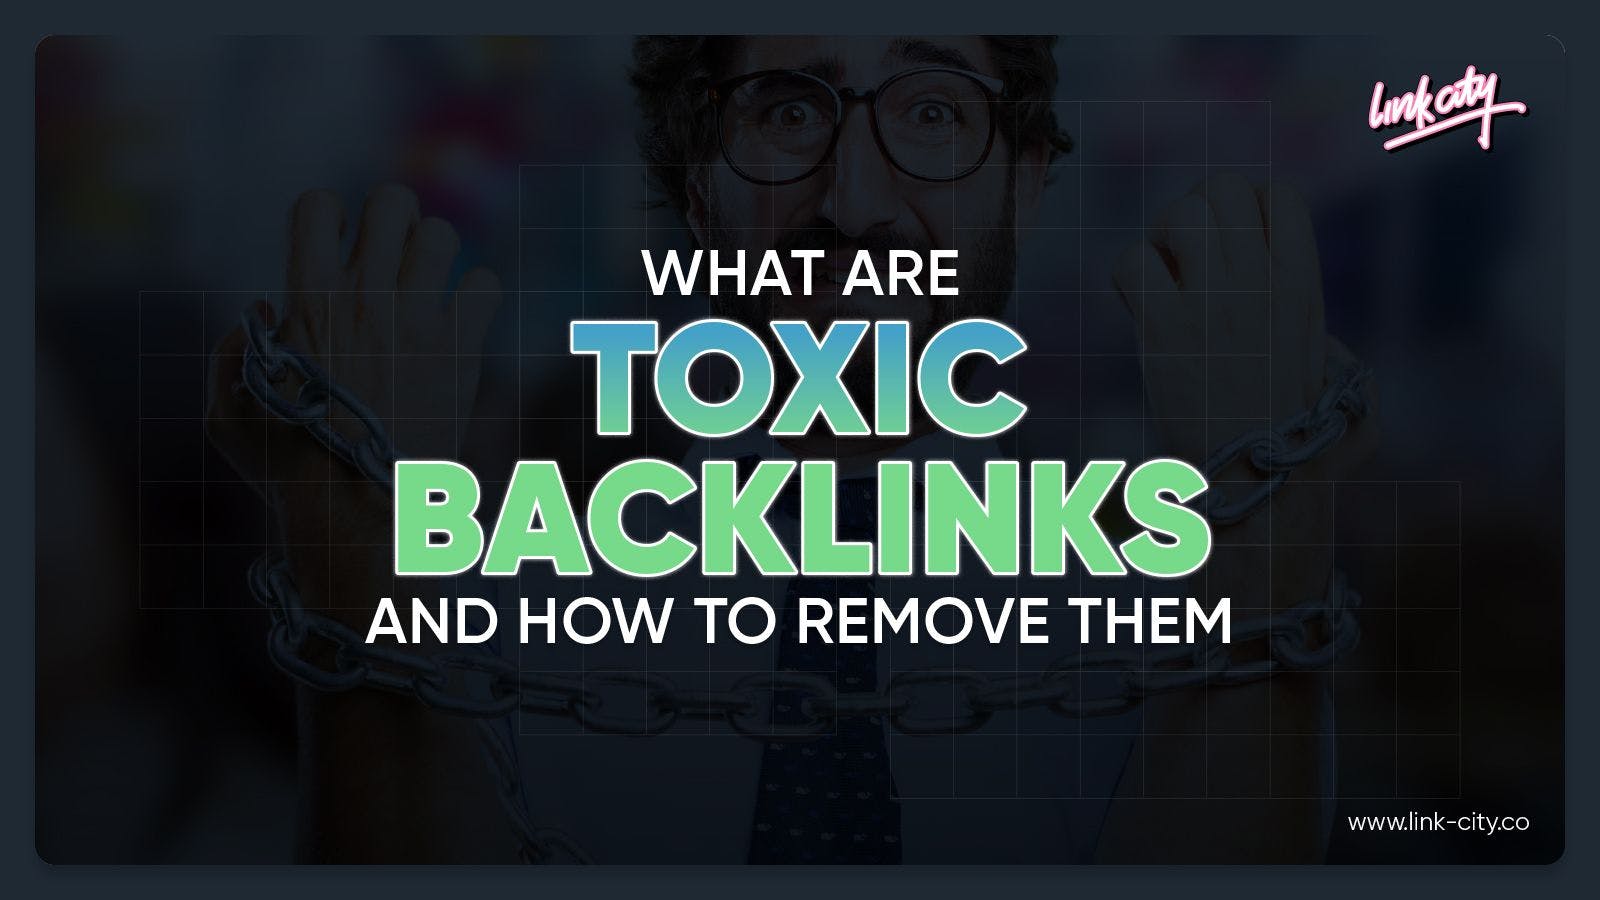 What Are Toxic Backlinks and How to Remove Them